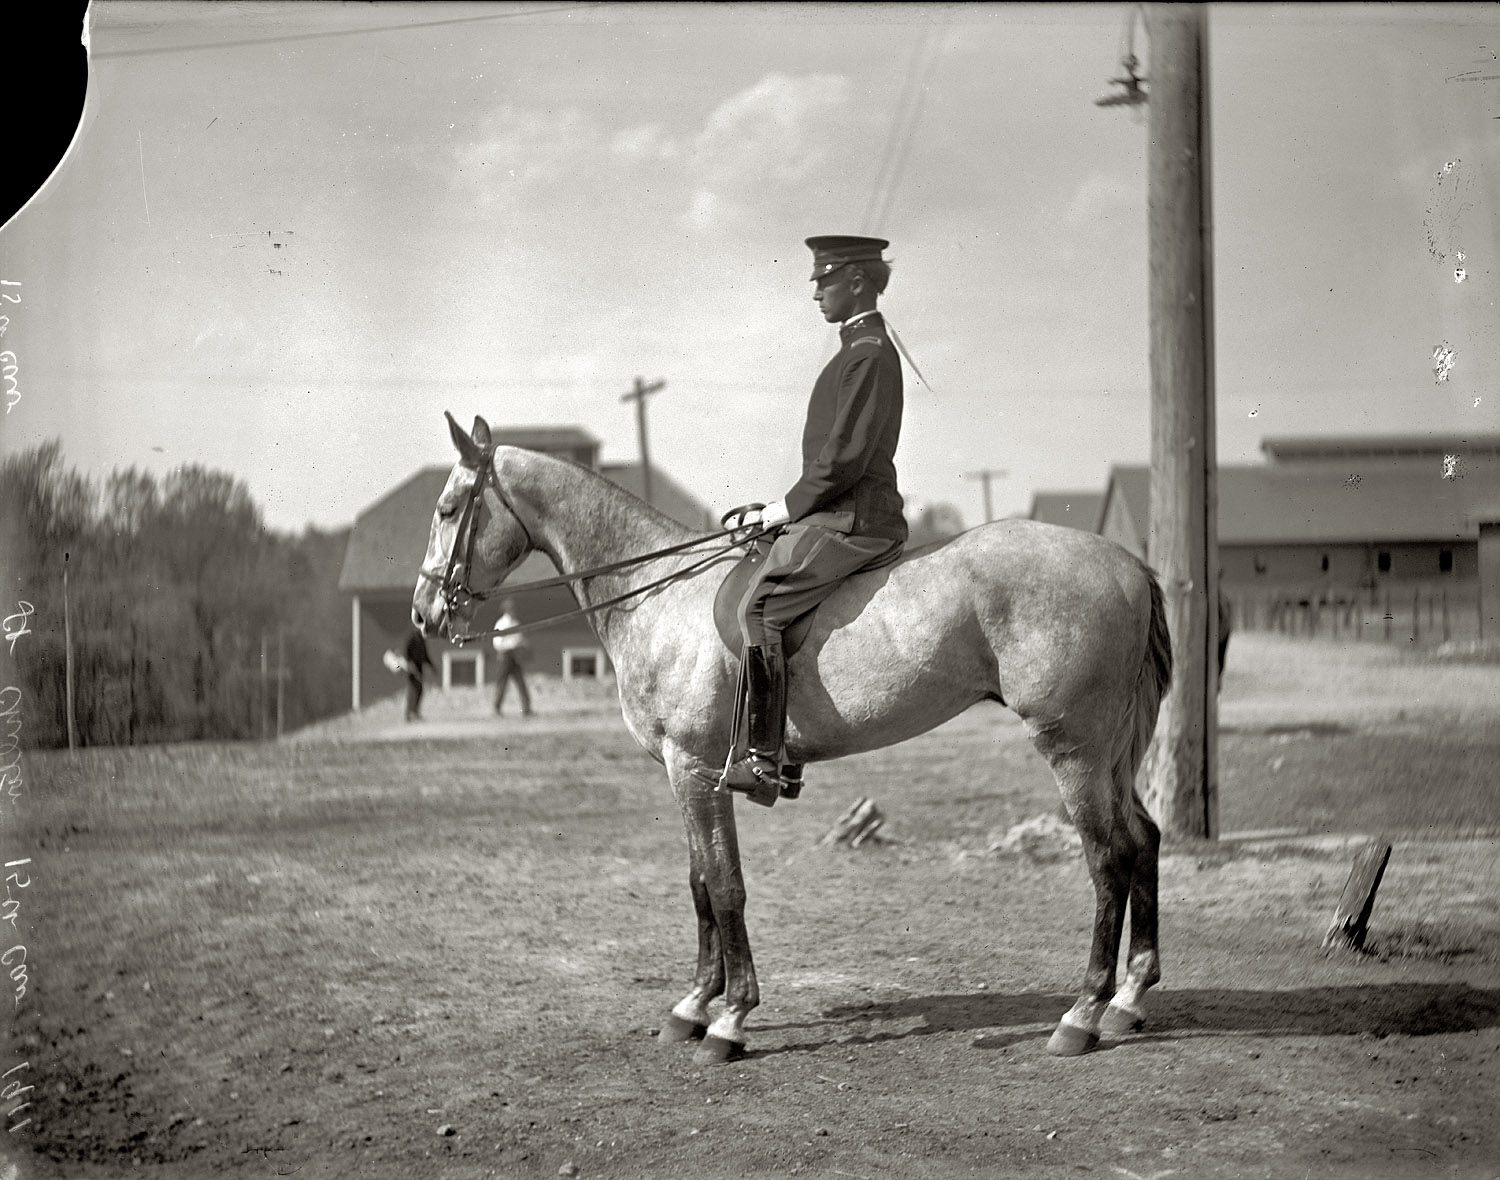 1911. "Lt. Alexander W. Chilton, 15th Cavalry." In or around Washington. National Photo Company glass negative. Library of Congress. View full size.